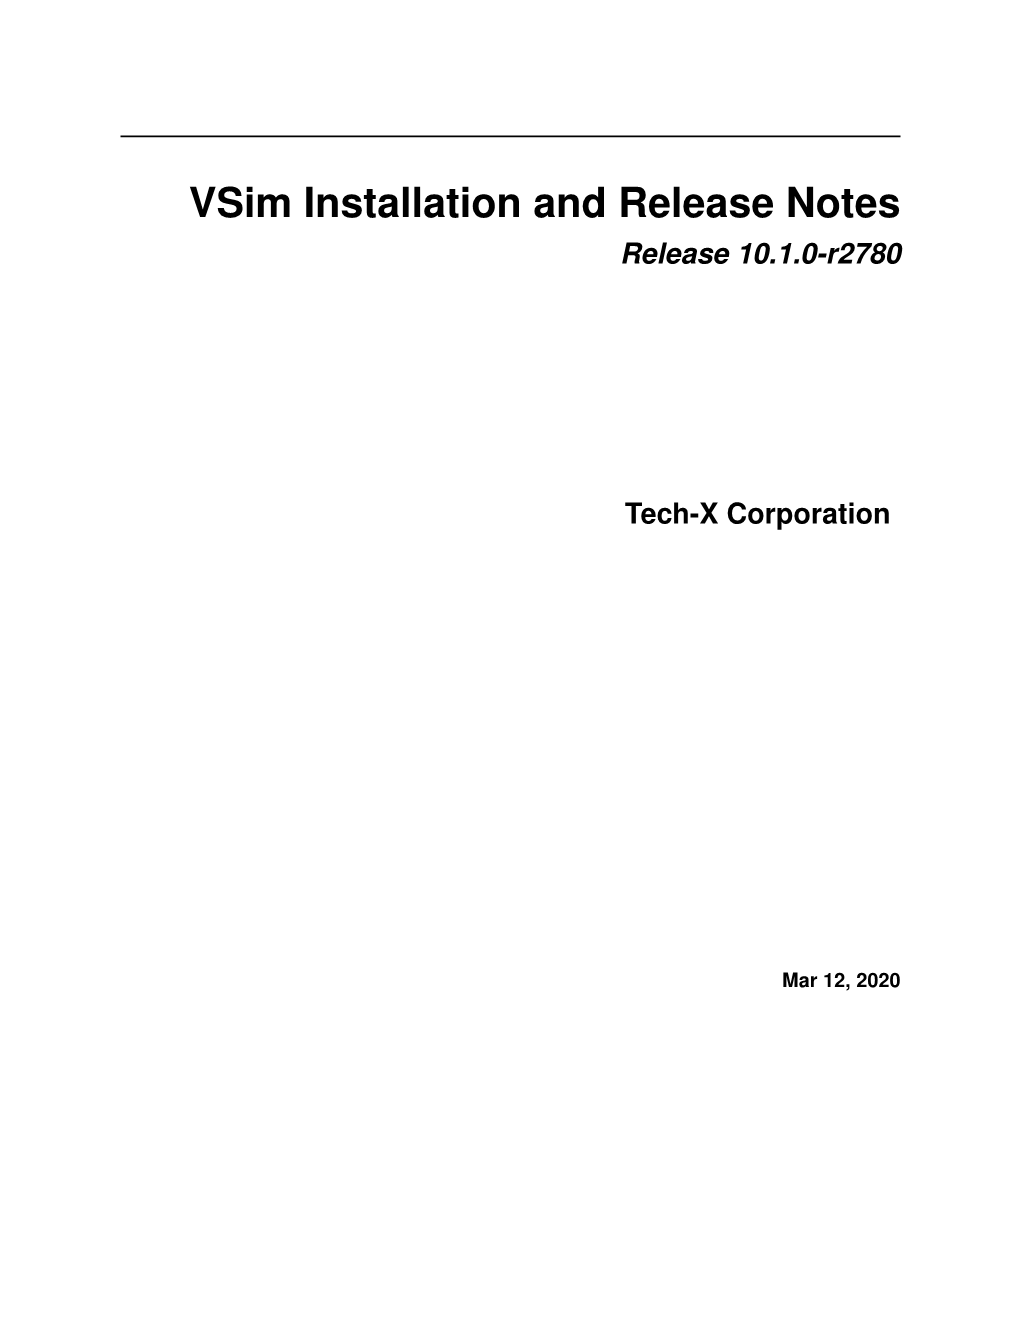 Vsim Installation and Release Notes Release 10.1.0-R2780